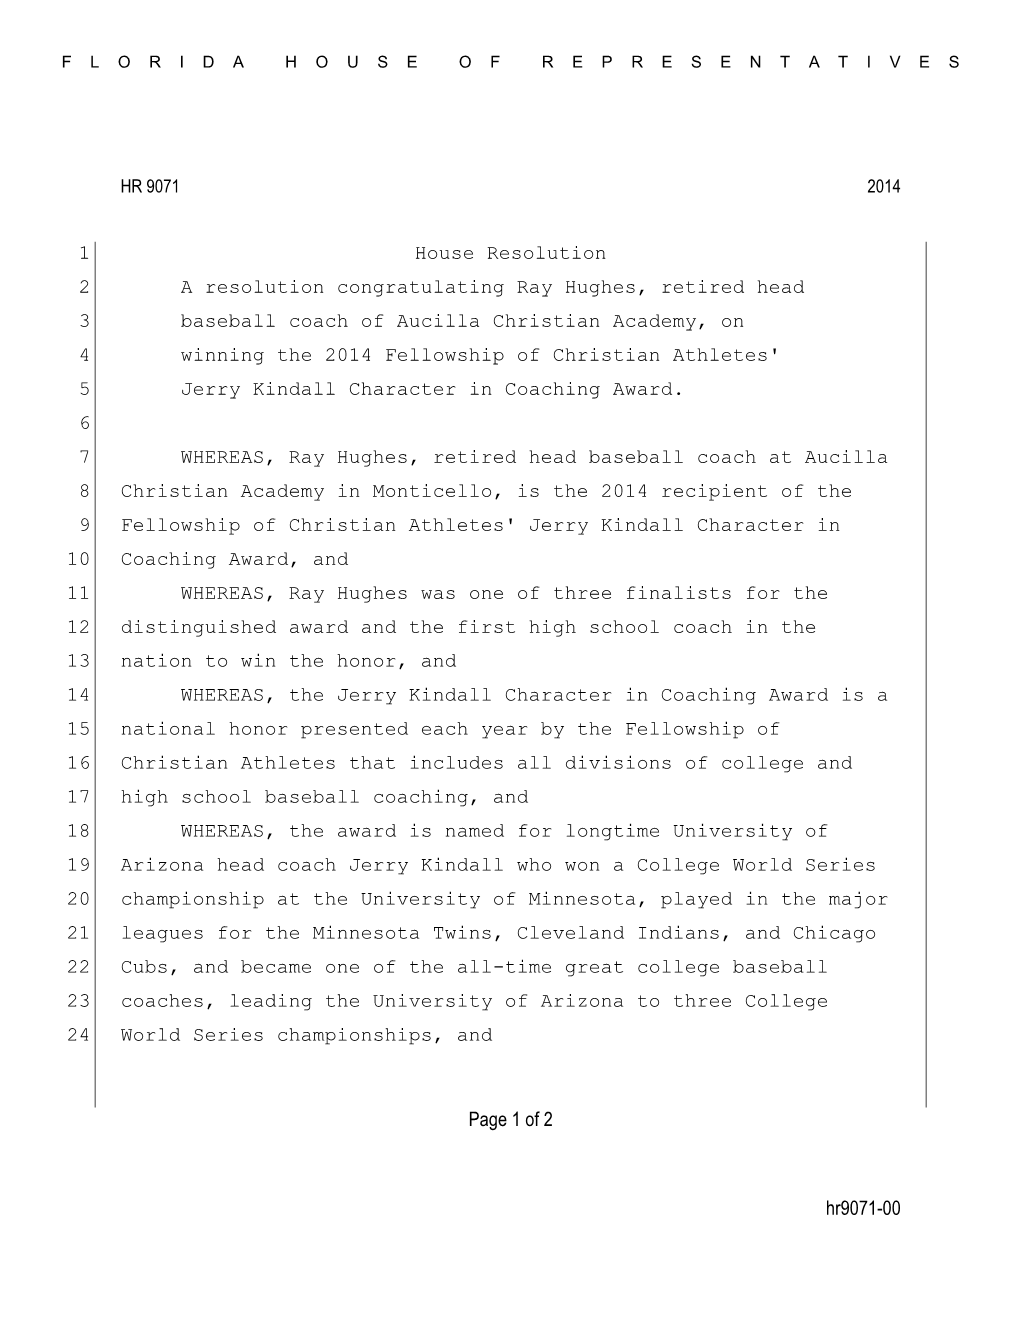 Hr9071-00 Page 1 of 2 House Resolution 1 A